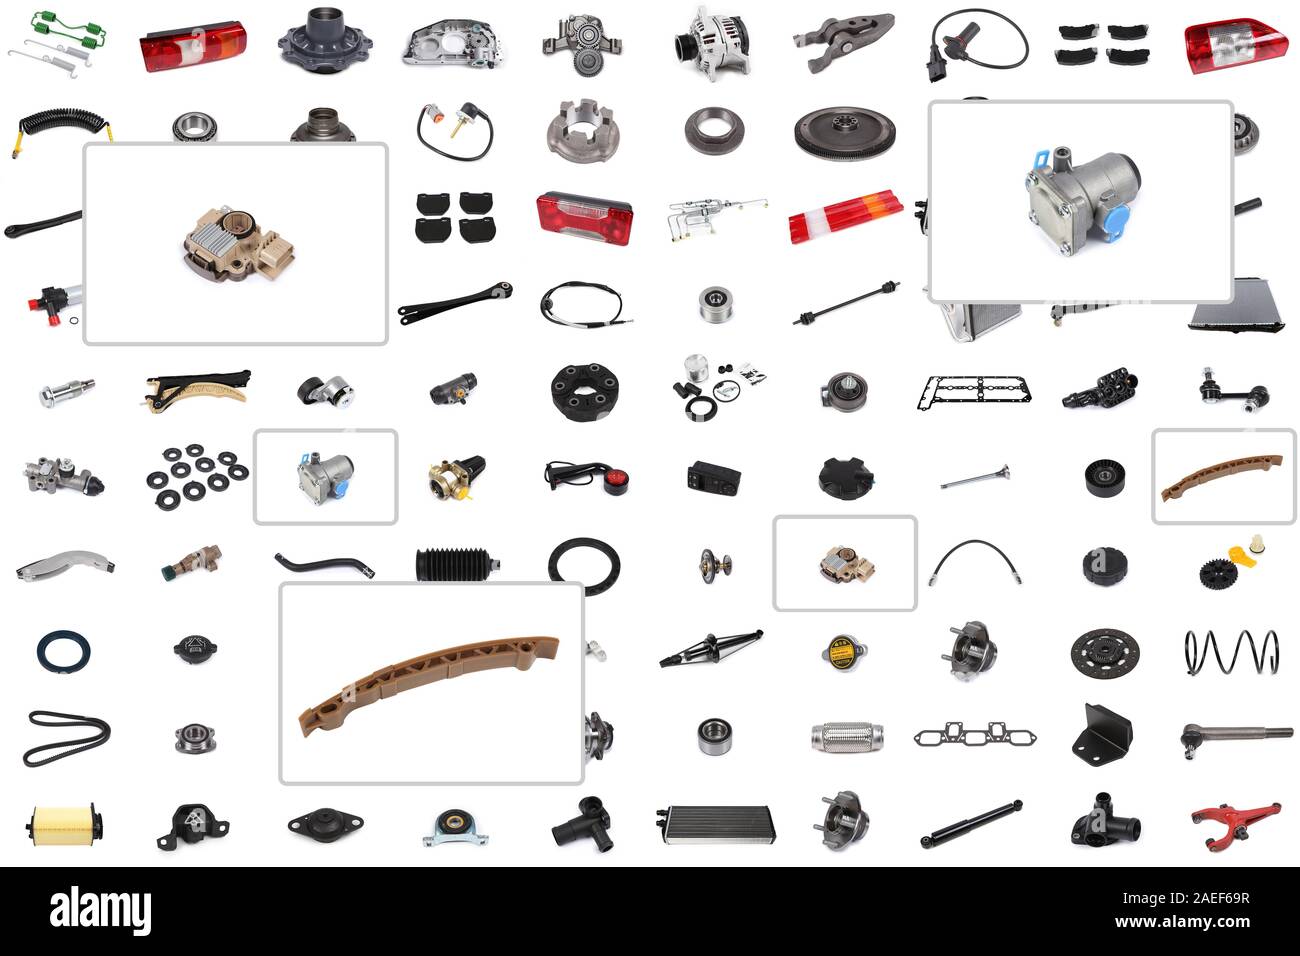 Collage of various auto parts for cars and trucks with an emphasis on three parts: circuit breaker, generator repair kit, valve. Stock Photo